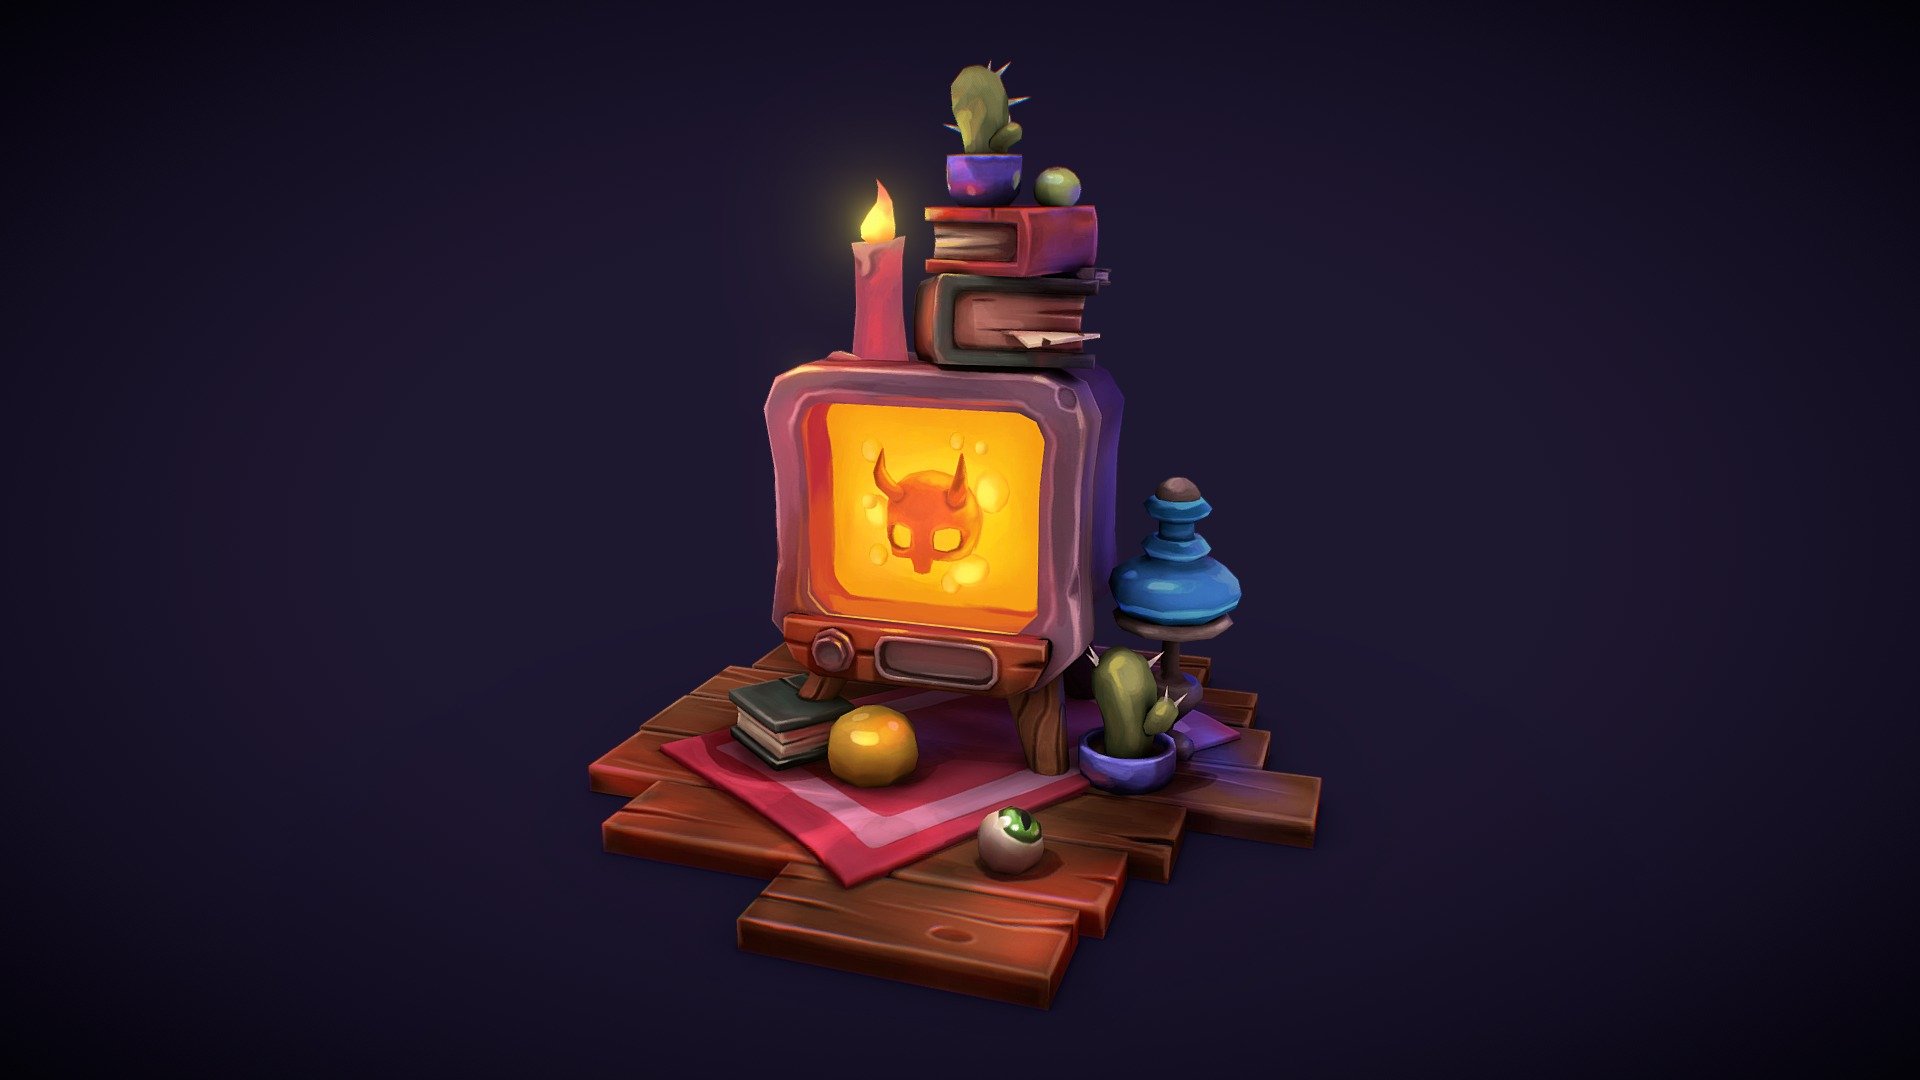 Quite a fire view, huh?

A little tribute to spooky season, right in time for Halloween. 
Took me a while, but I finally got my head around the interface and shortcuts in Blender :D


Based on a concept  by Vitaliya Vivilil ✨ - Hell-O there! - 3D model by Miray Scheidel (@Miandray) 3d model